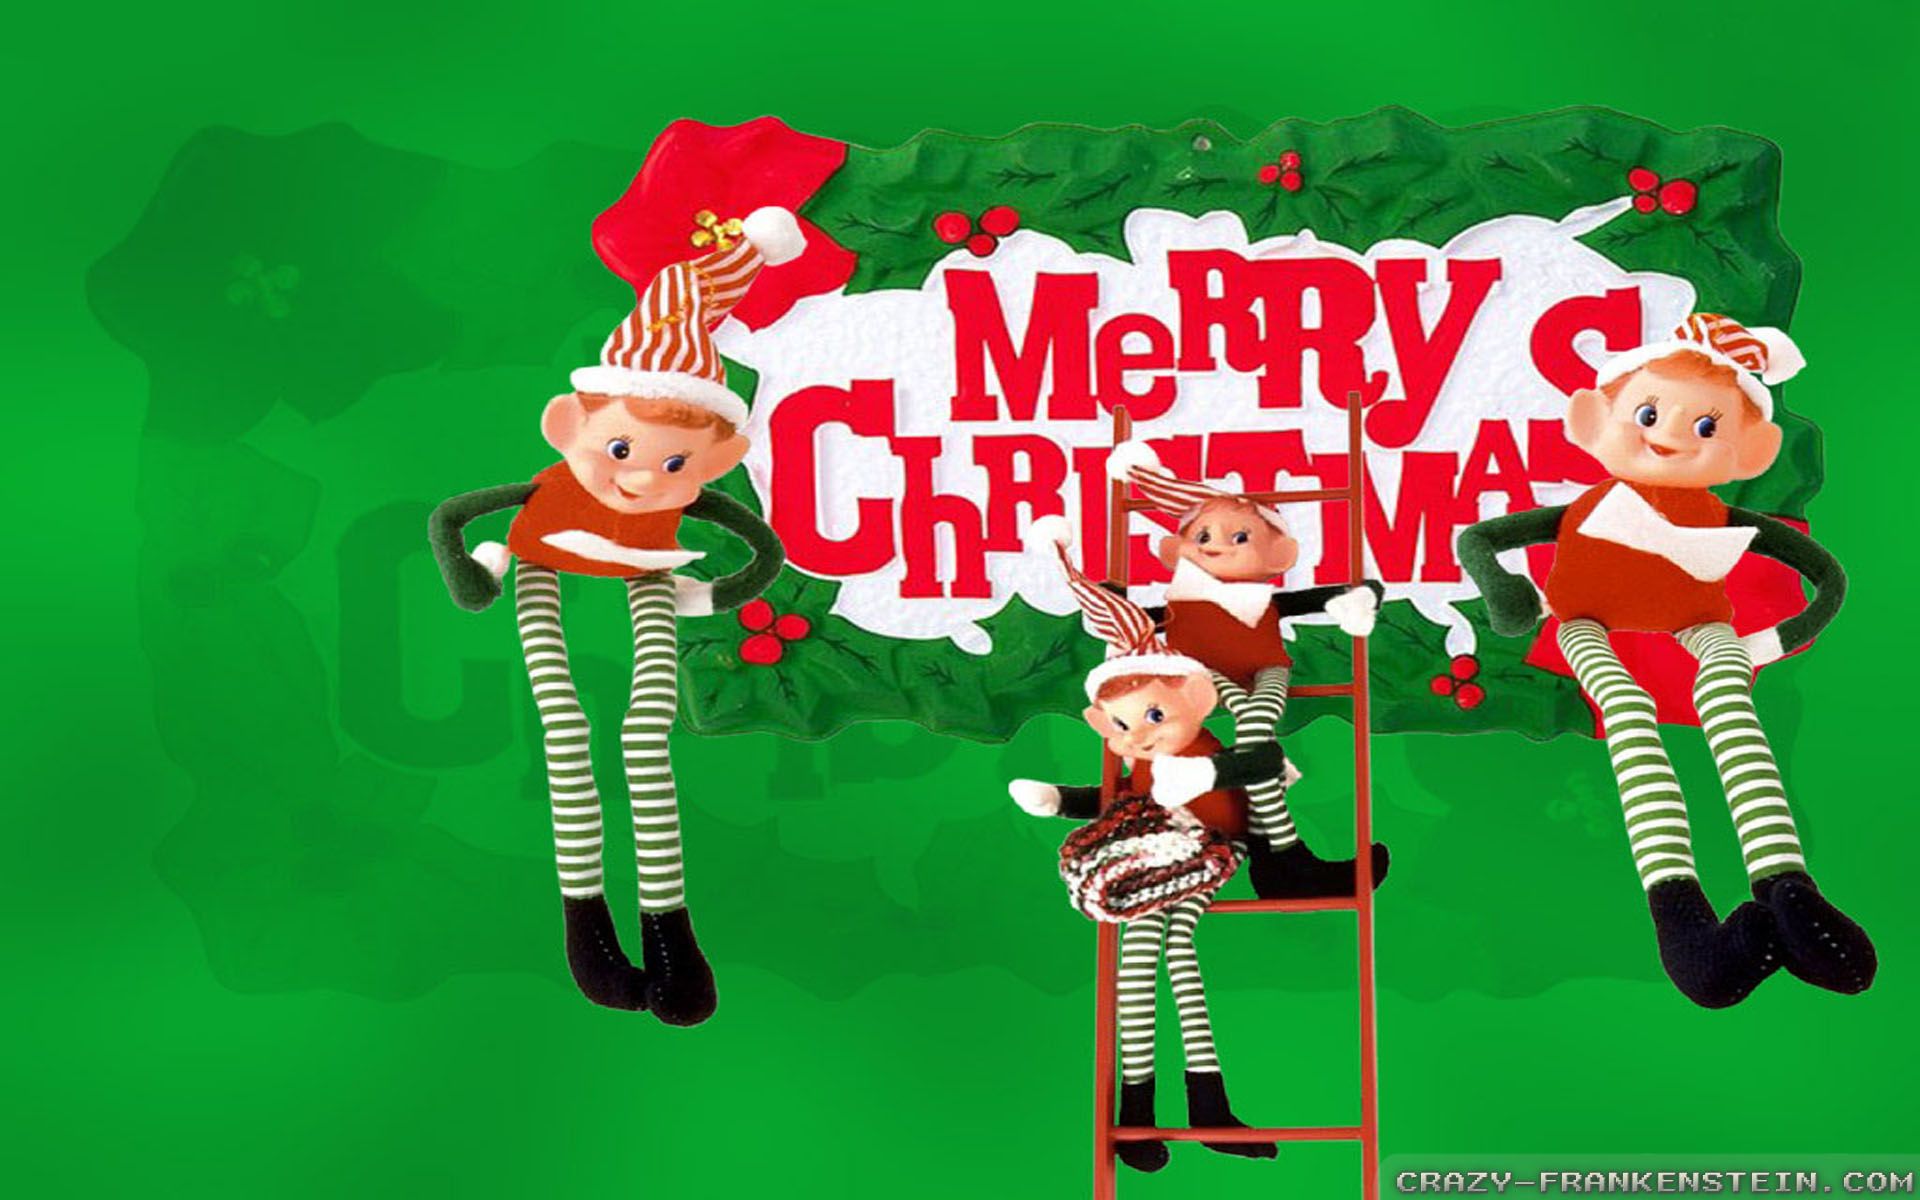 Christmas Elves Wallpapers